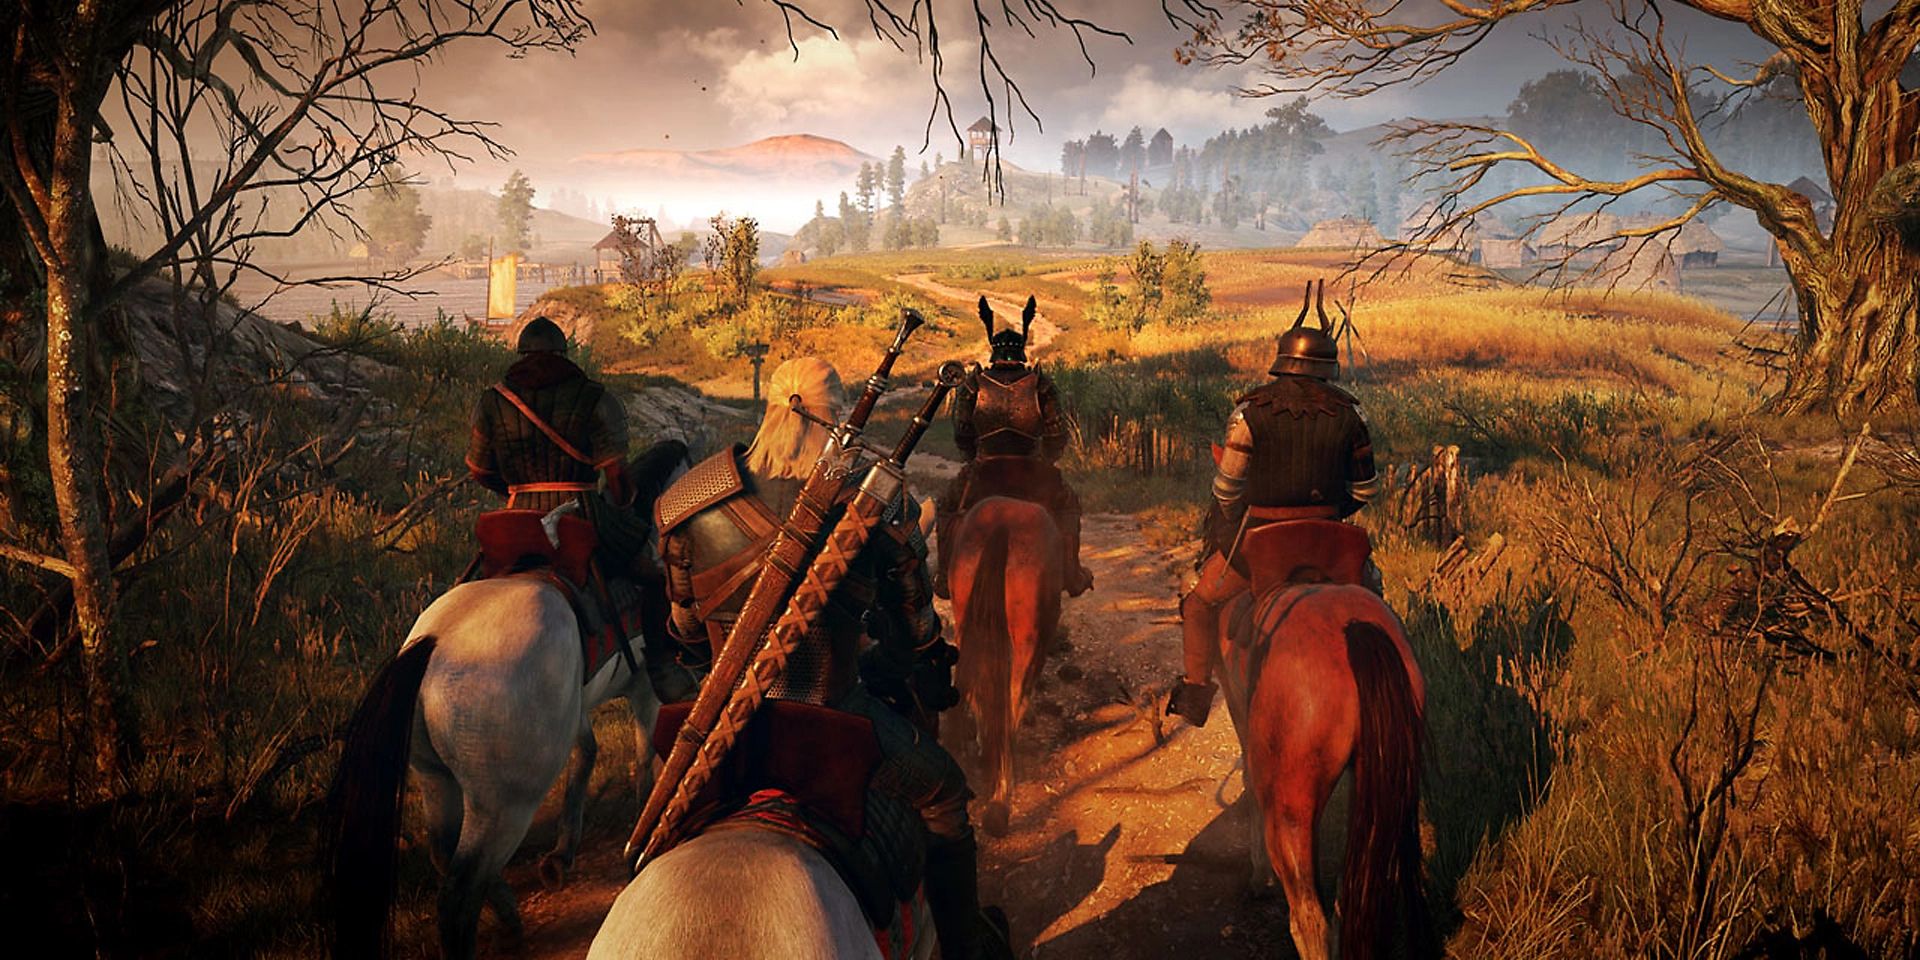 CD Projekt Studio could be working on a multiplayer Witcher game